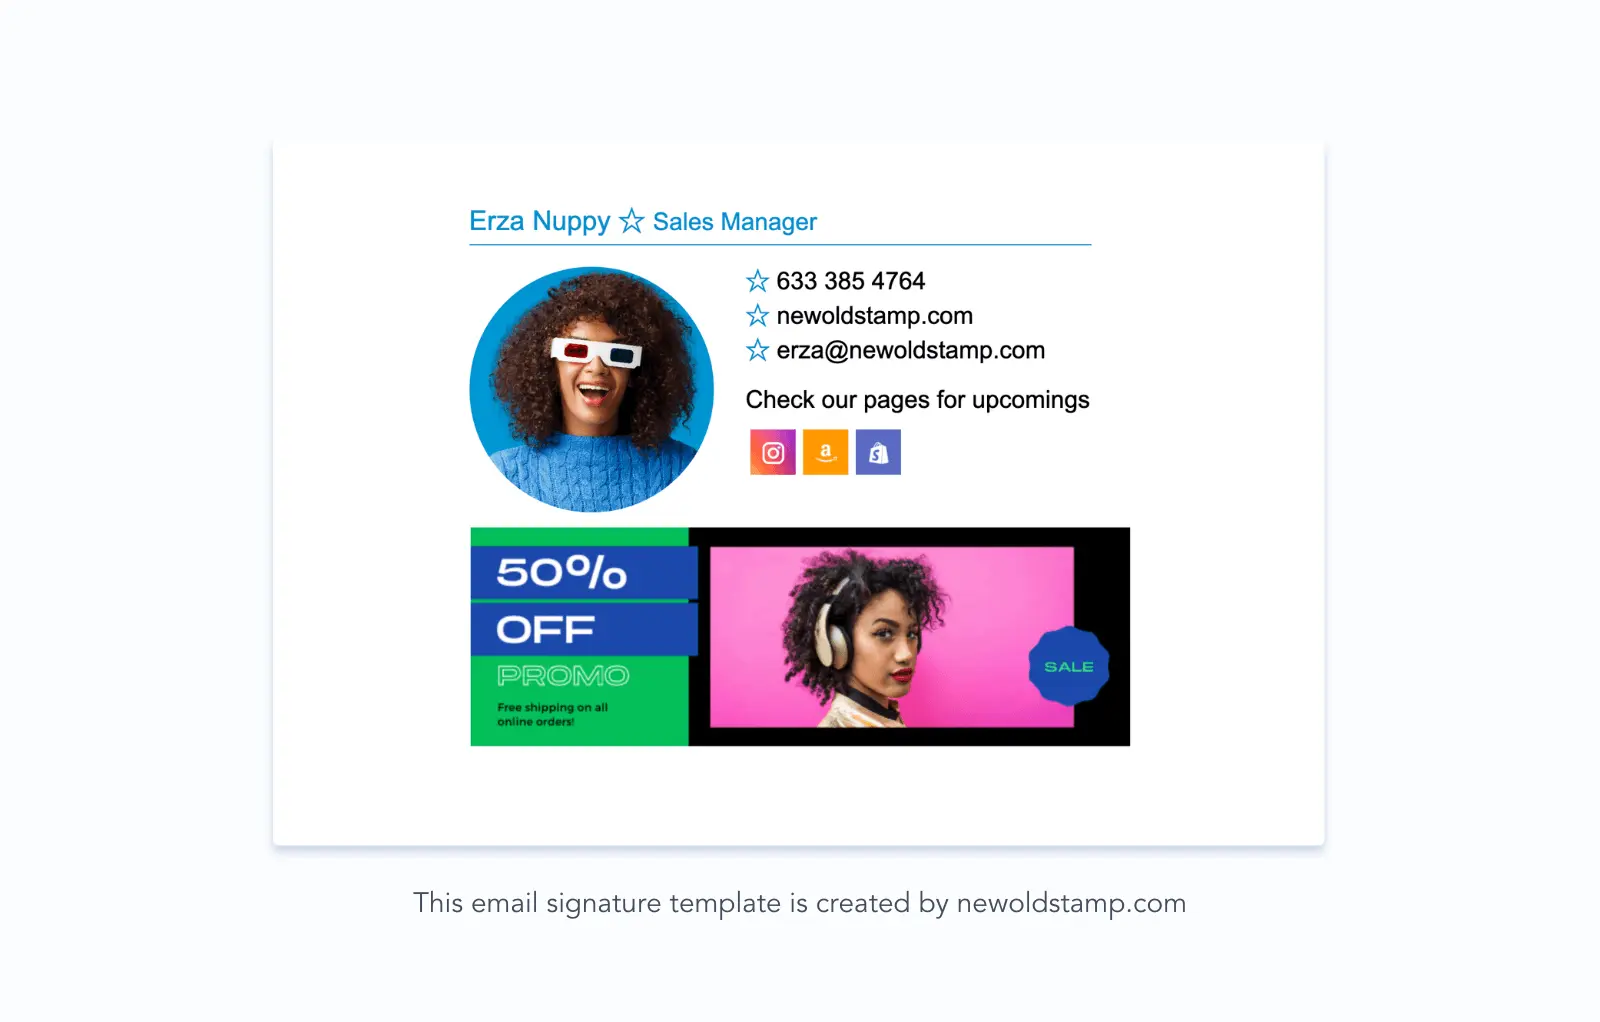 email signature marketing to promote your deals